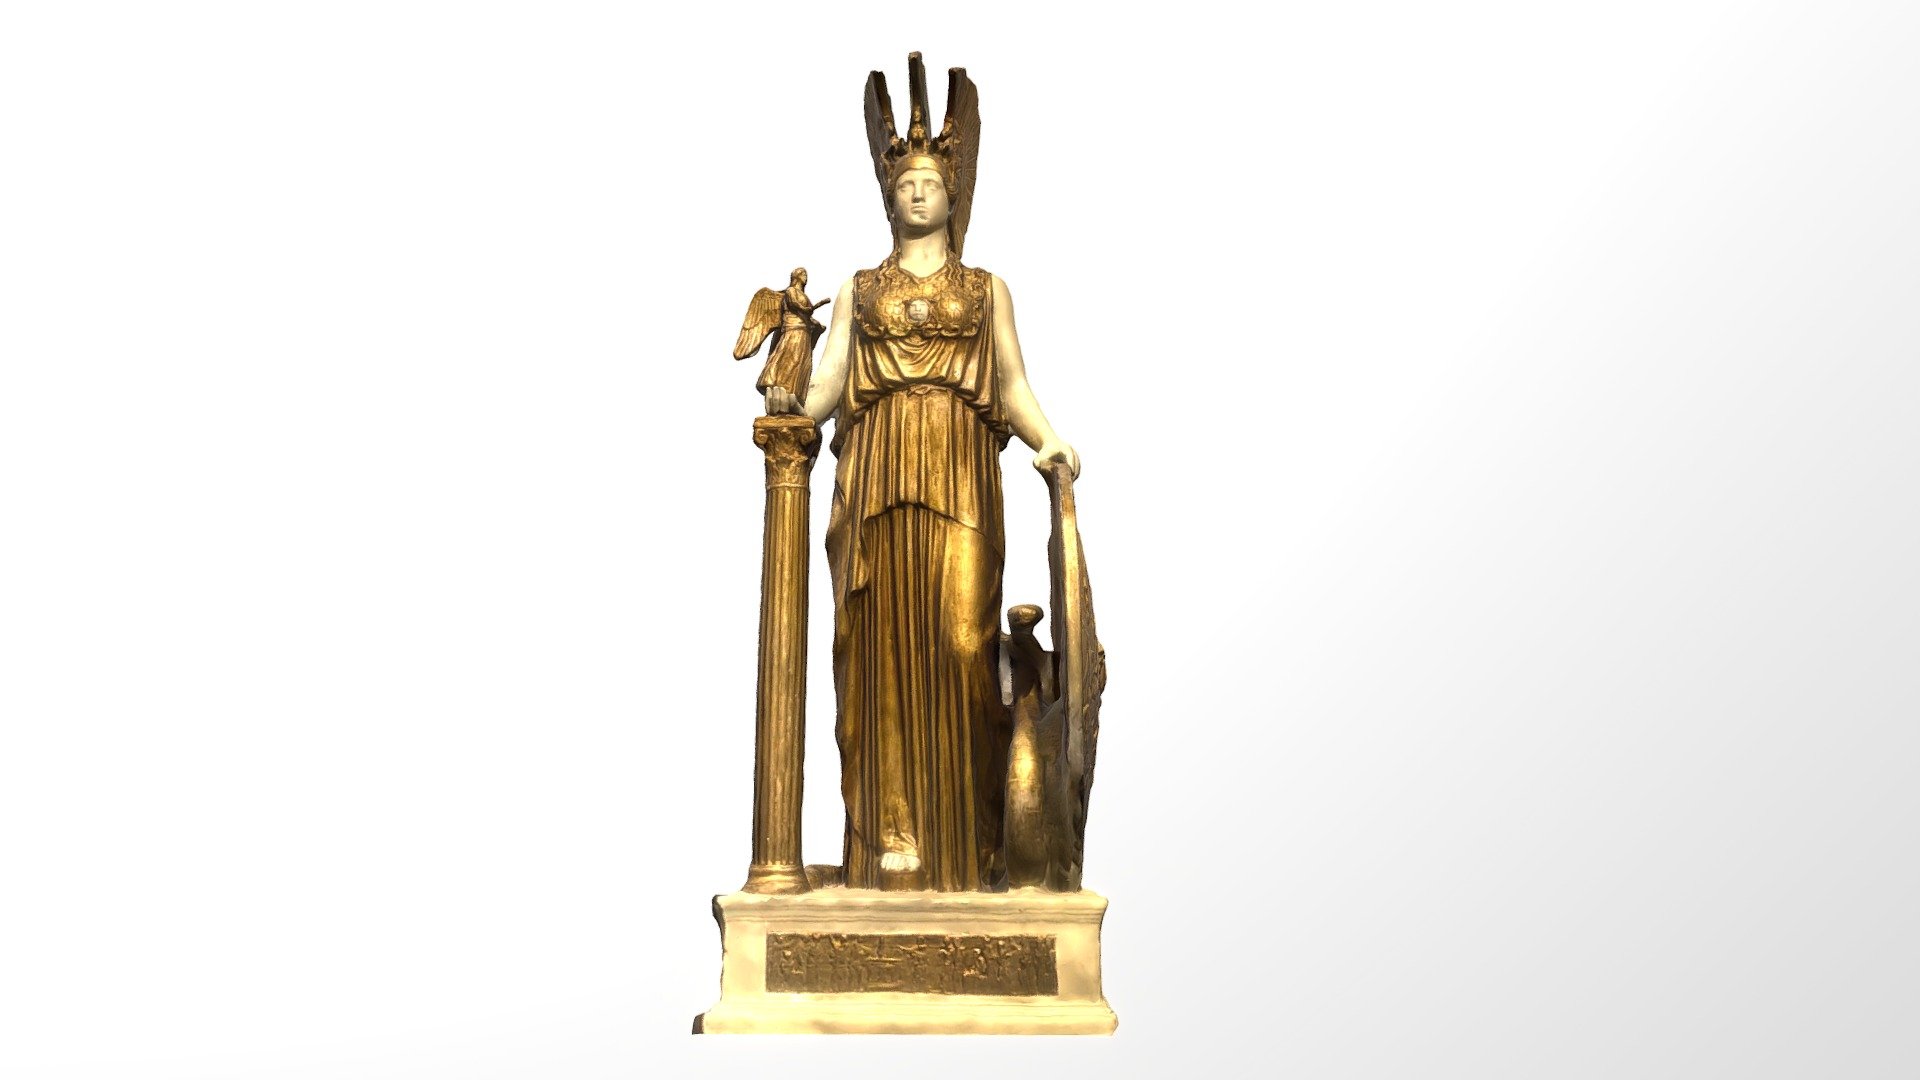 3D scan of a miniature sculpture of goddess athena. Captured at The Parthneon, Nashville, TN. It was difficult to take pictures through a glass box. The helmet suffered the most. This sculpture is protected by copyright, so I had to disable the download. Also, this marks the last day of my 100 day 3d scan project. (72 Images, Photo Mode).

Captured with Polycam - Day 100: Goddess Athena - 3D model by uttamg911 3d model